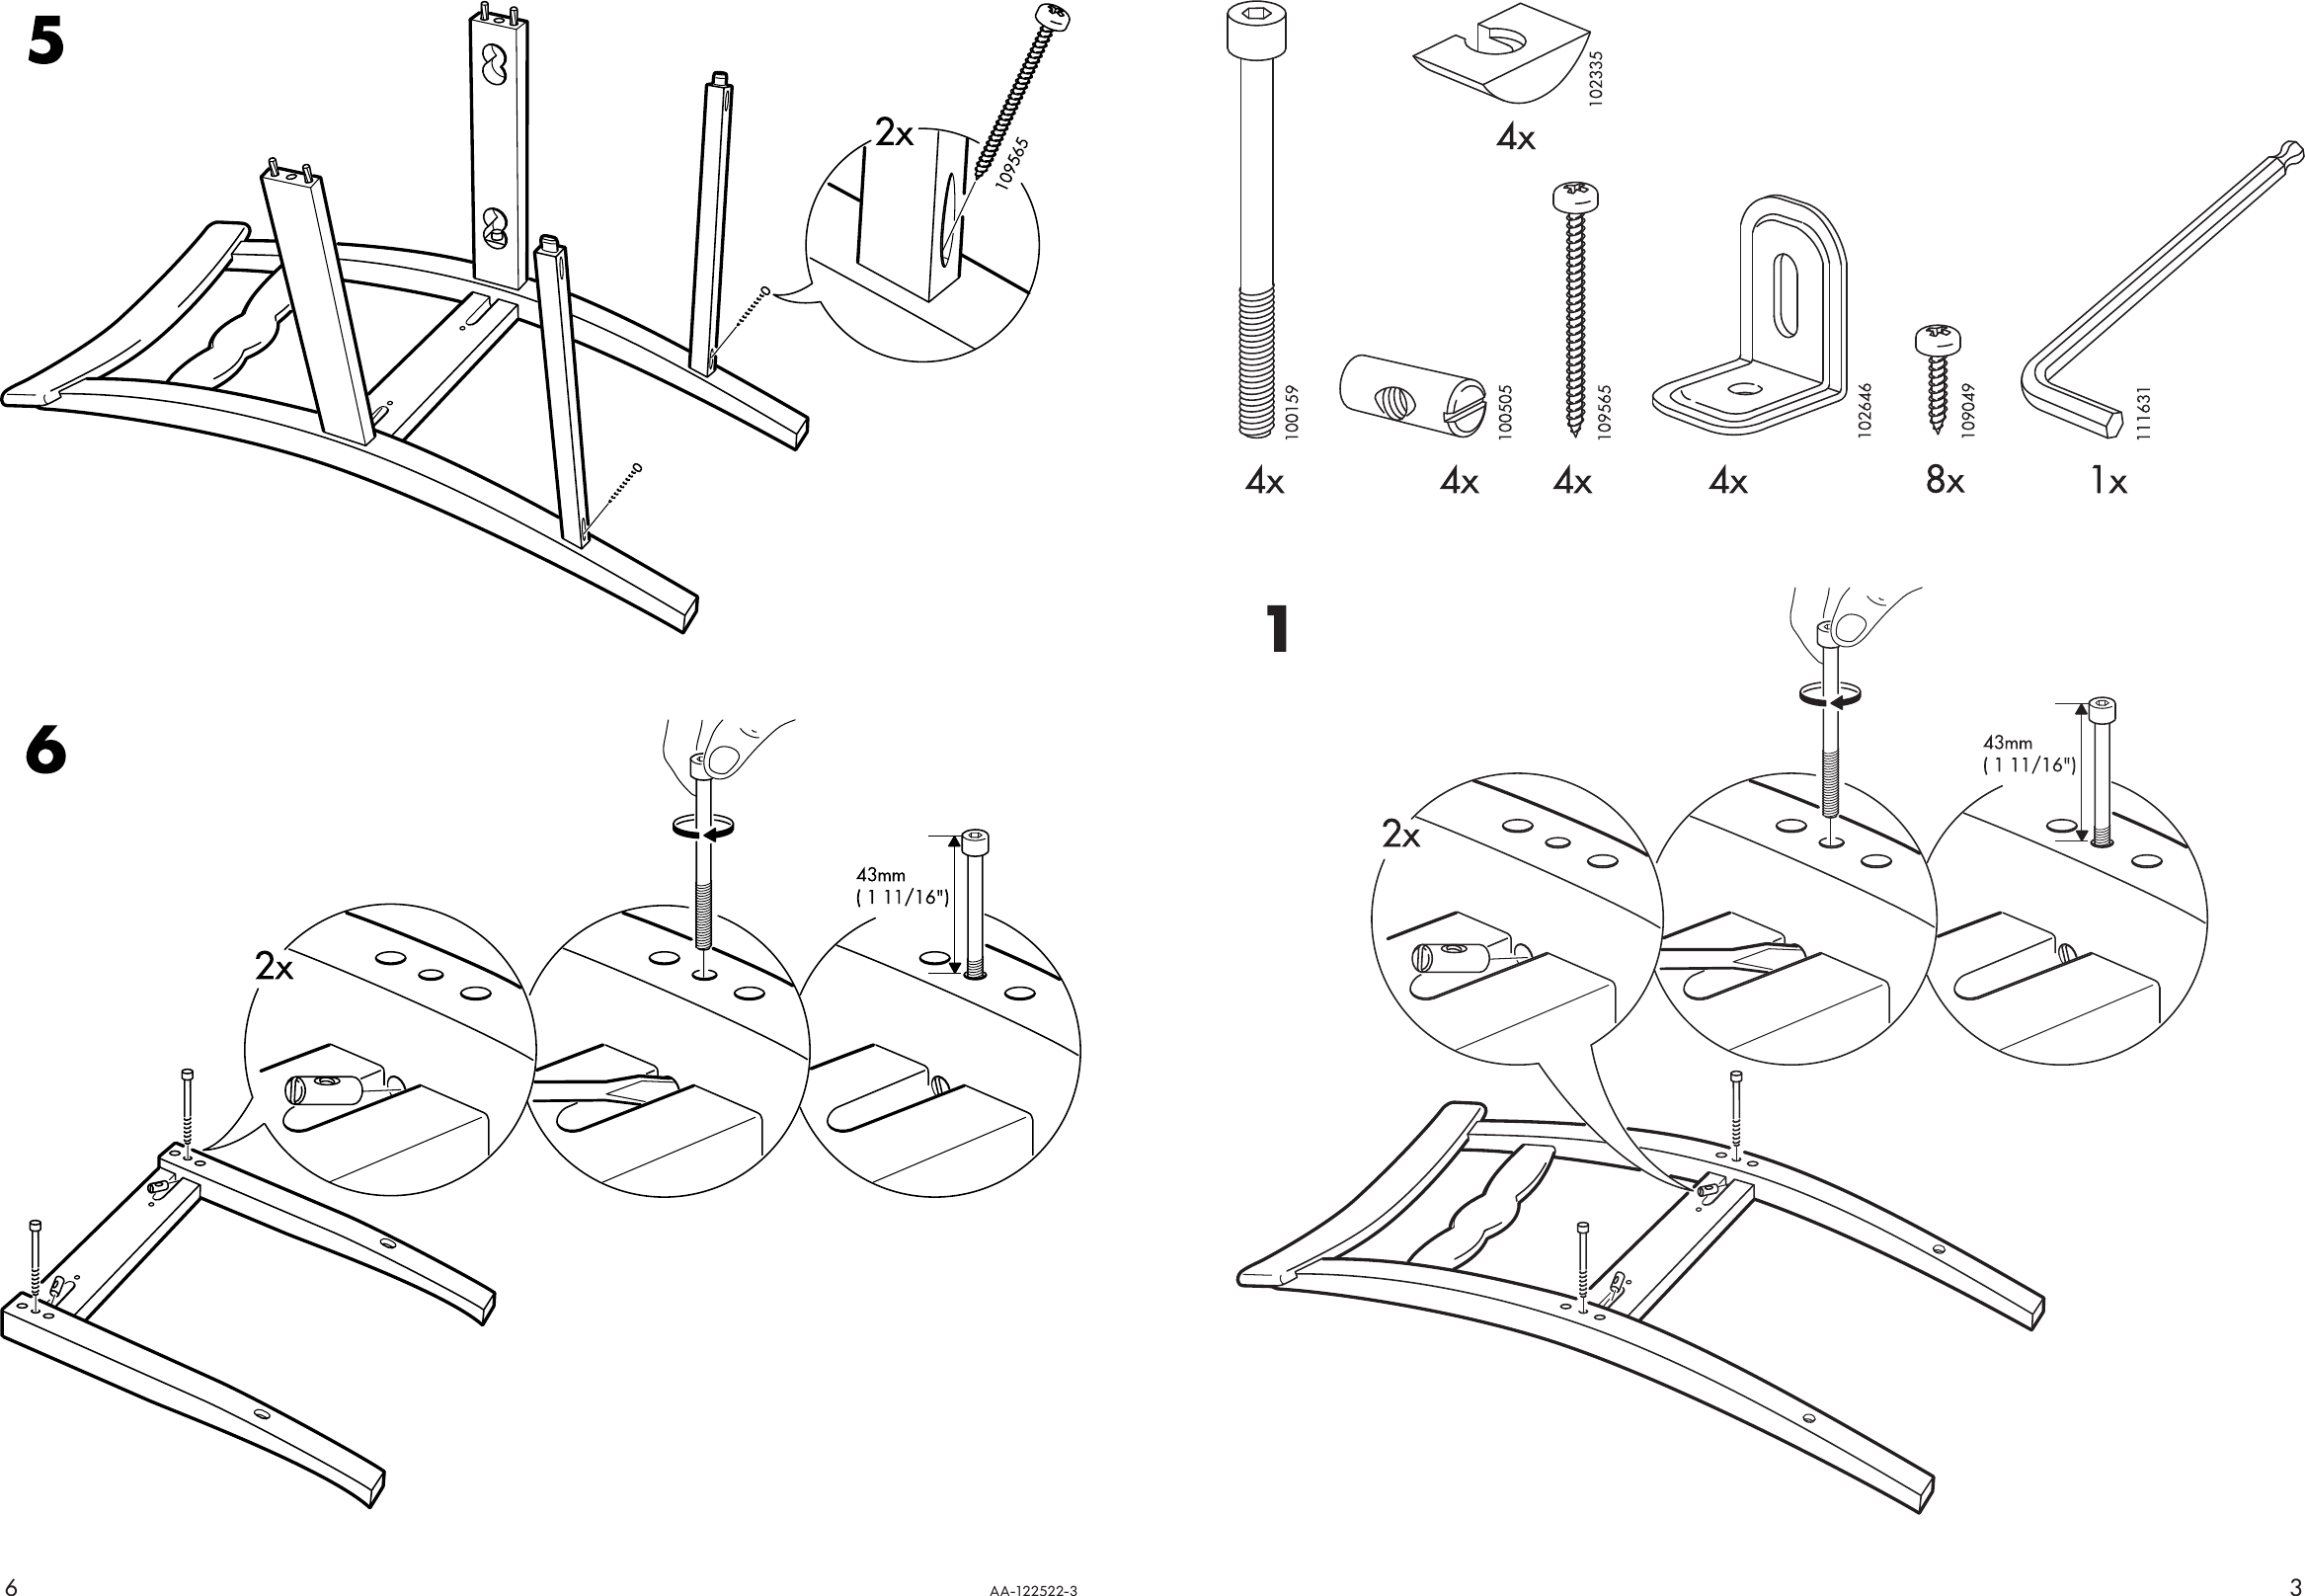 Page 3 of 4 - Ikea Ikea-Lanni-Chair-Assembly-Instruction